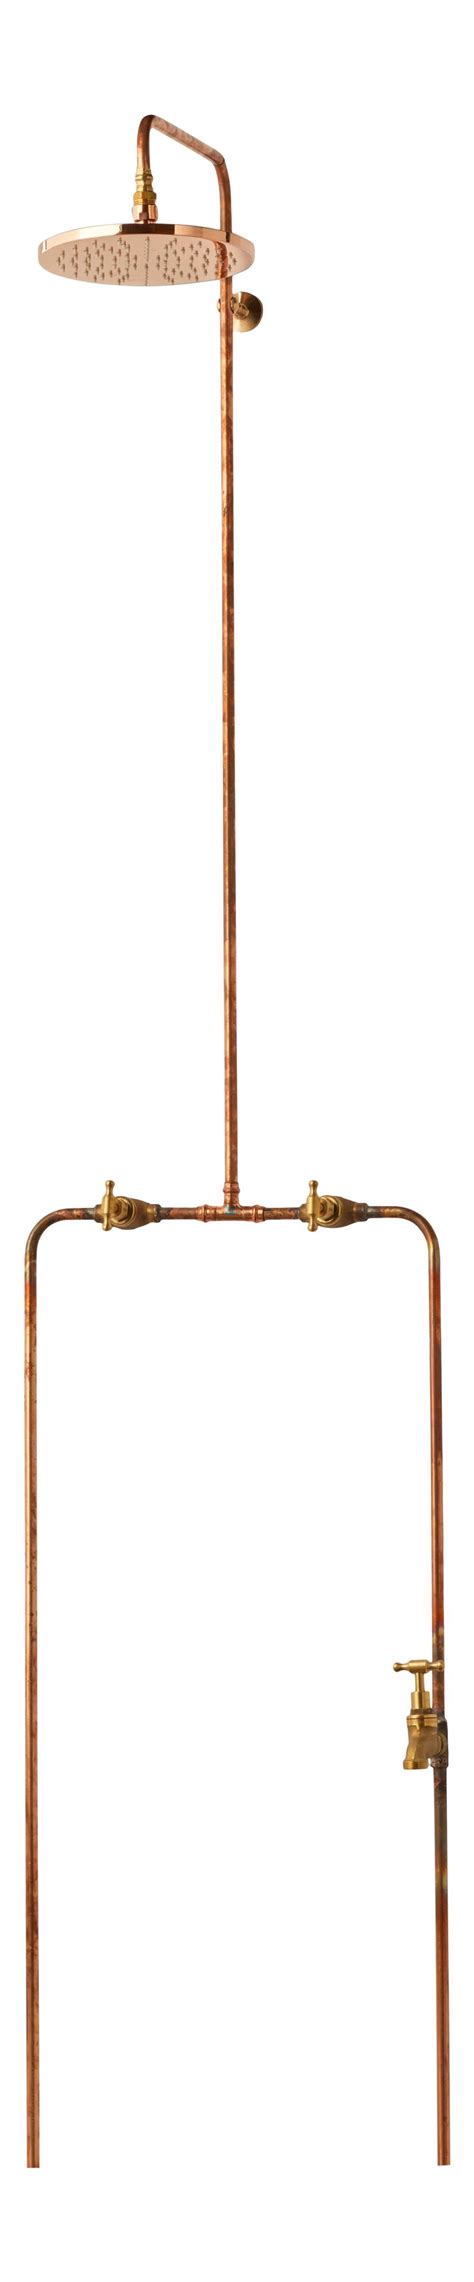 Outdoor Copper Shower With Extension Shower Plumbing Outdoor Shower Shower